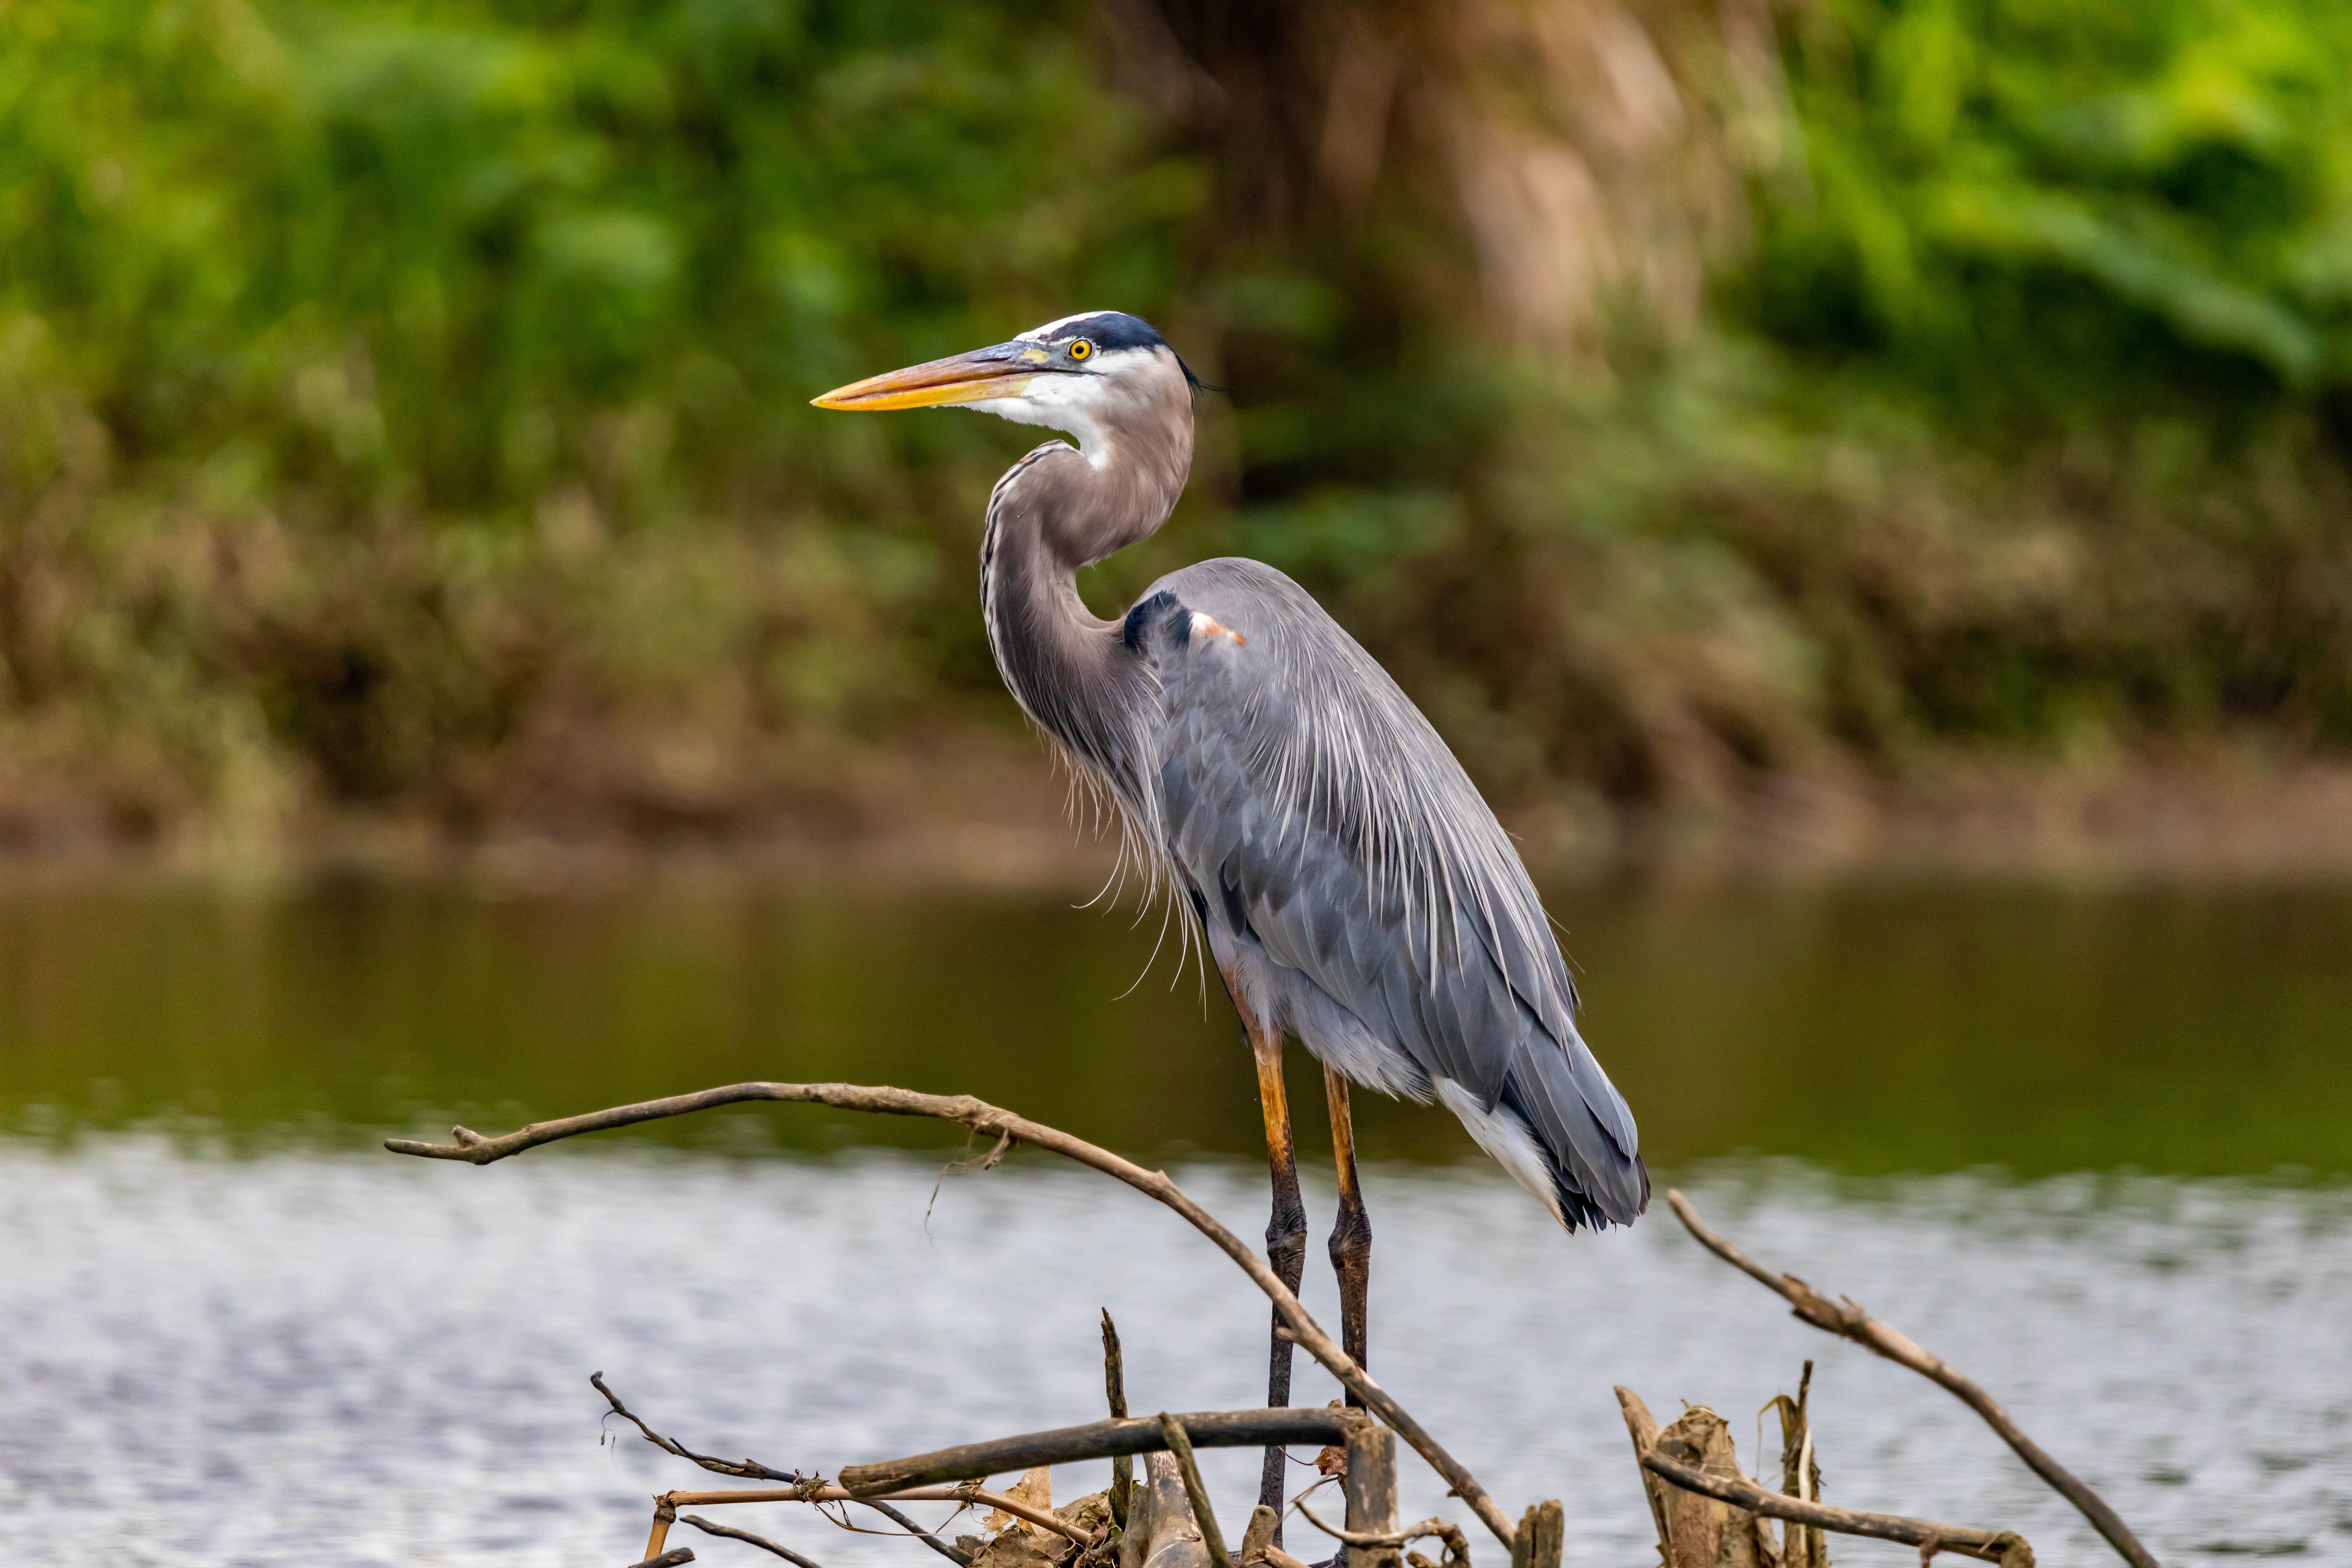 A heron perched on a stump. | Photo: Pexels